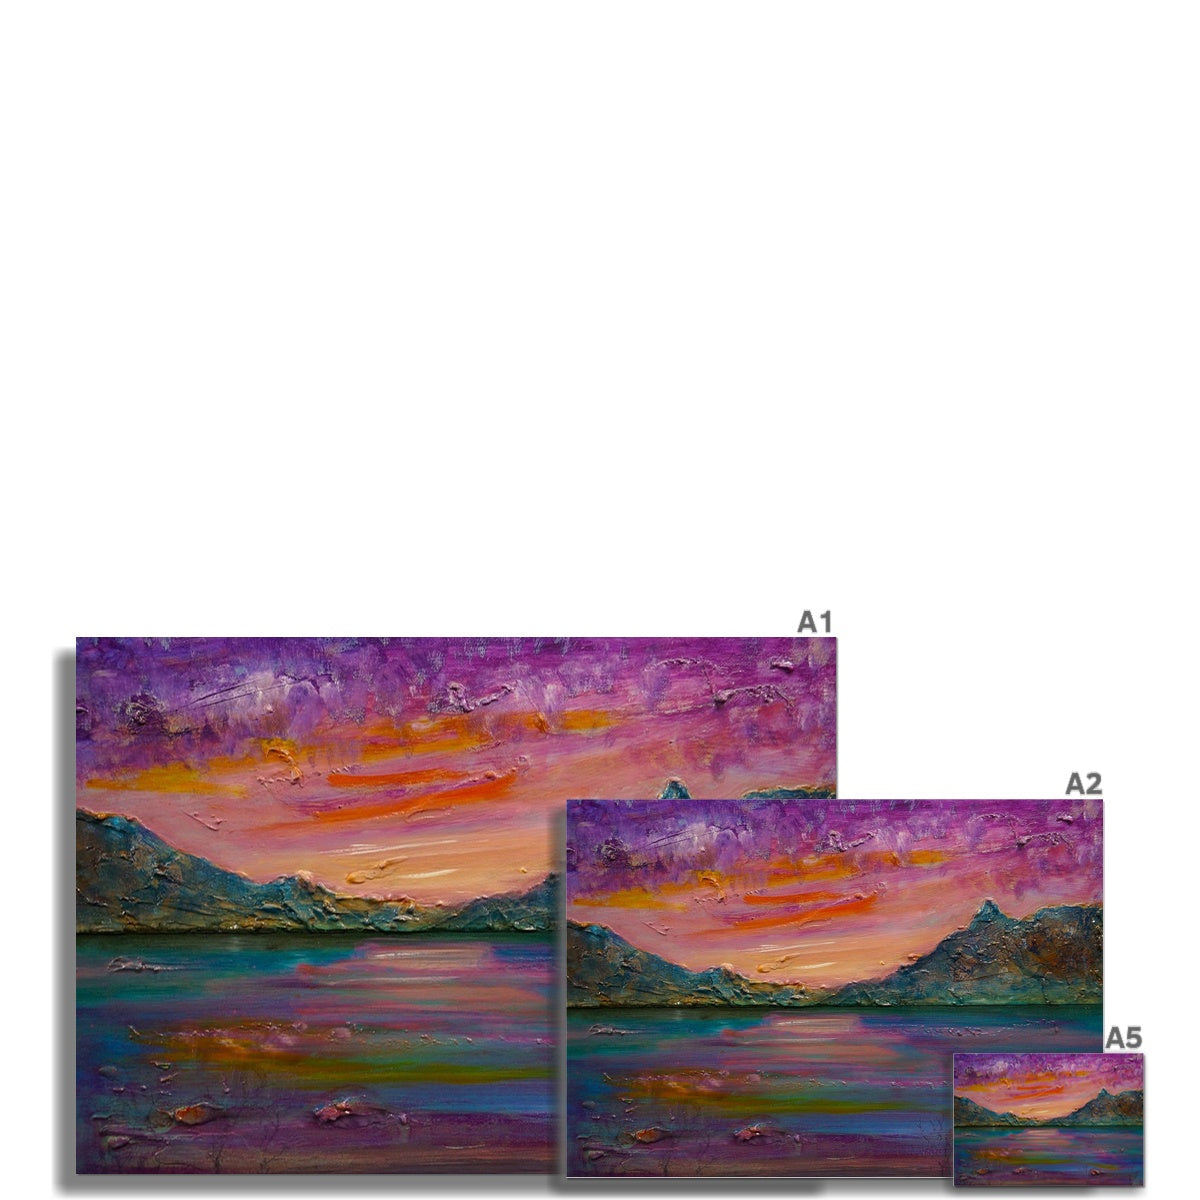 Loch Leven Sunset Painting | Fine Art Prints From Scotland-Unframed Prints-Scottish Lochs & Mountains Art Gallery-Paintings, Prints, Homeware, Art Gifts From Scotland By Scottish Artist Kevin Hunter